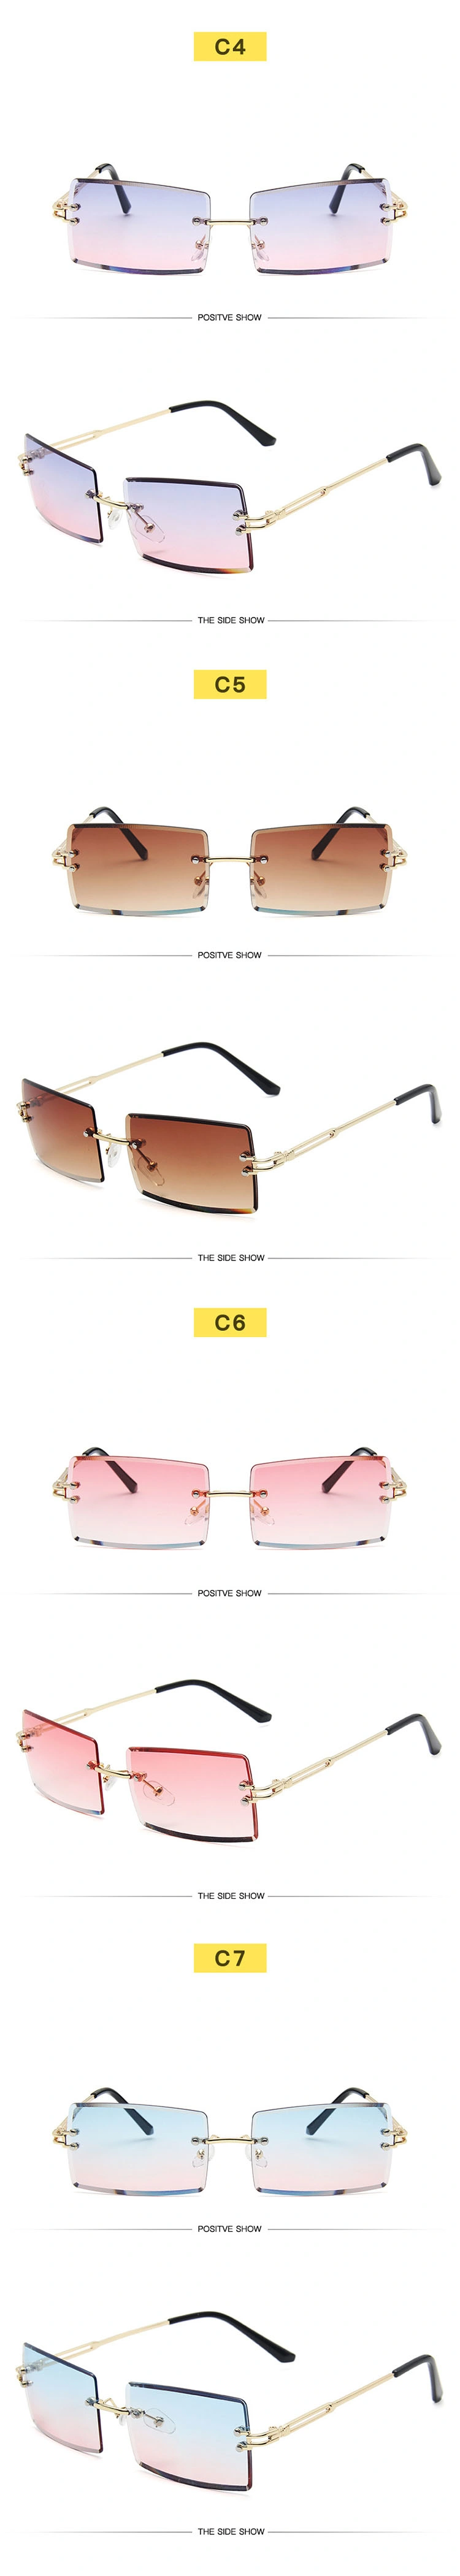 New Sunglasses for 2020 Rimless and Trimmed Sunglasses for Ladies Square Web Celebrity Gradient Shades